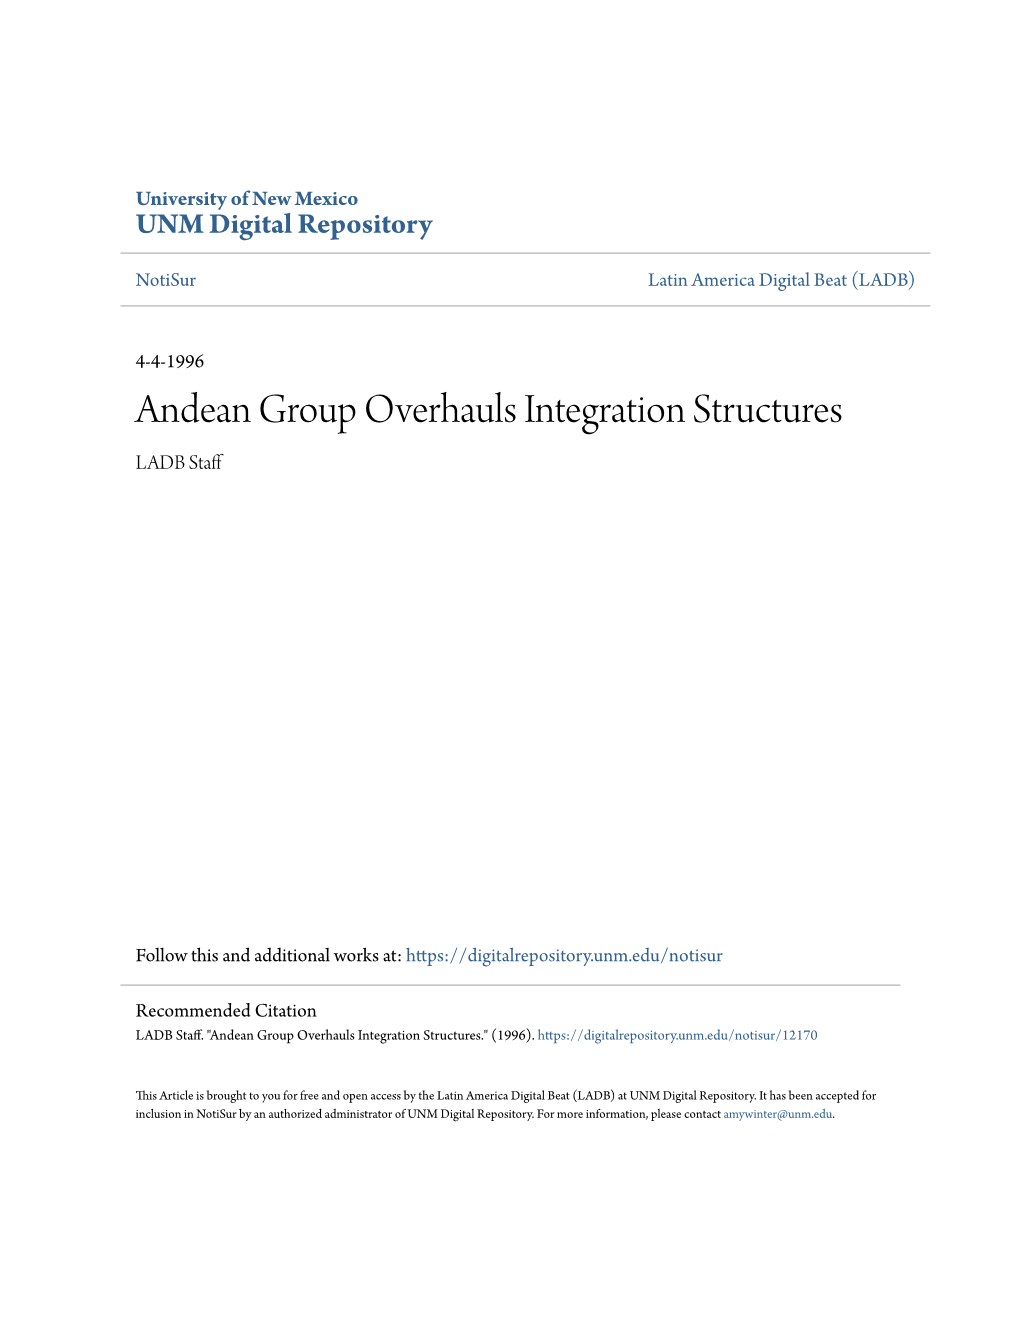 Andean Group Overhauls Integration Structures LADB Staff